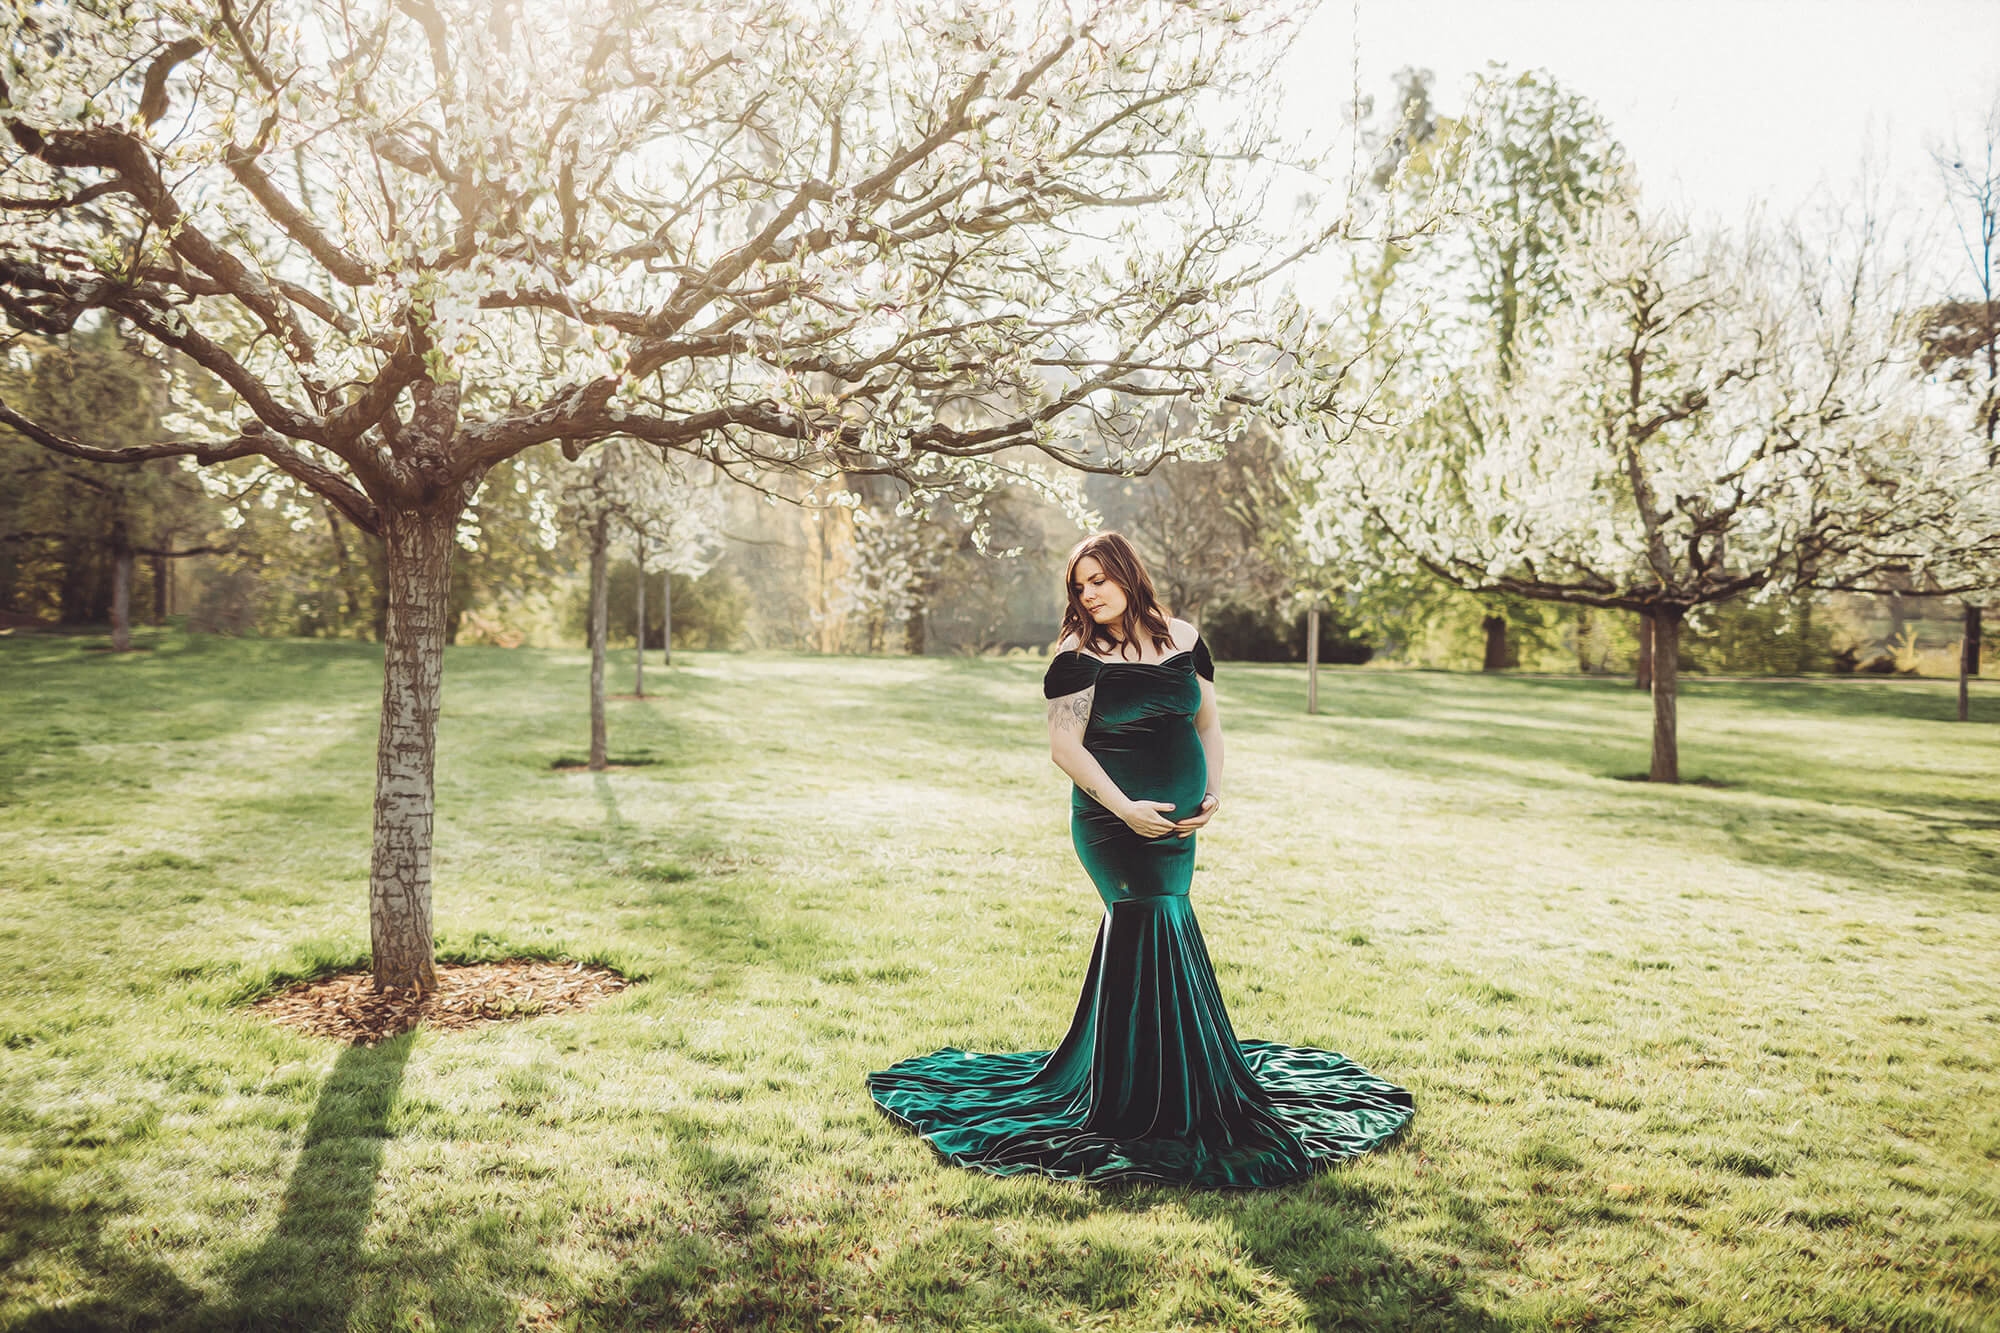 Christina posed in her green velvet gown under the spring blossoms in the early morning light.